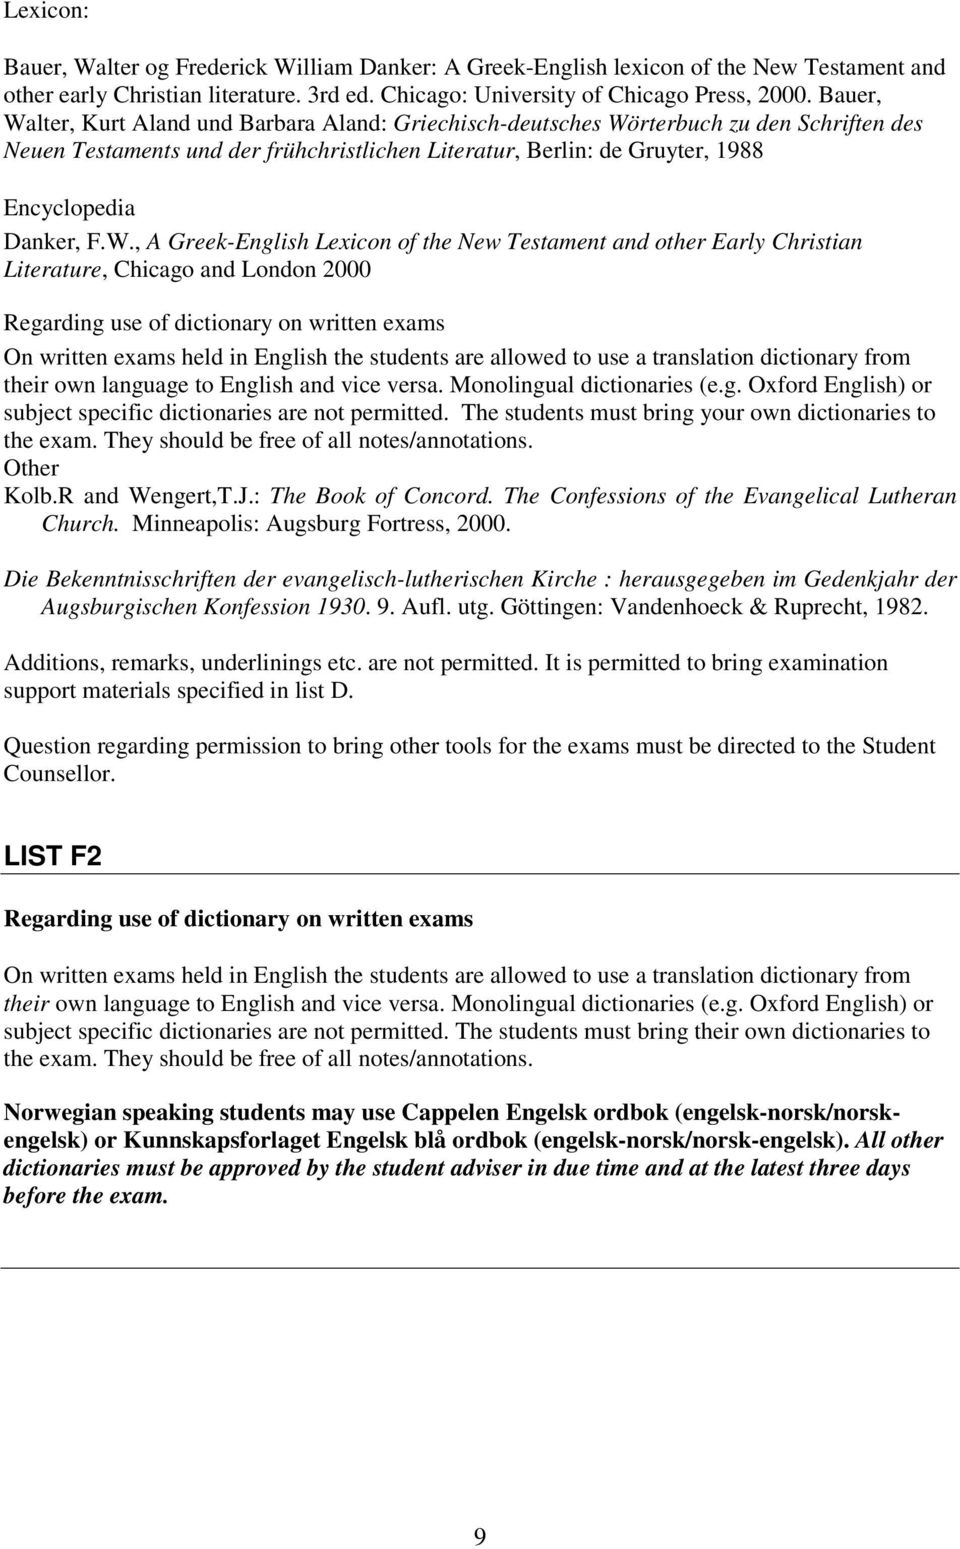 W., A Greek-English Lexicon of the New Testament and other Early Christian Literature, Chicago and London 2000 Regarding use of dictionary on written exams On written exams held in English the